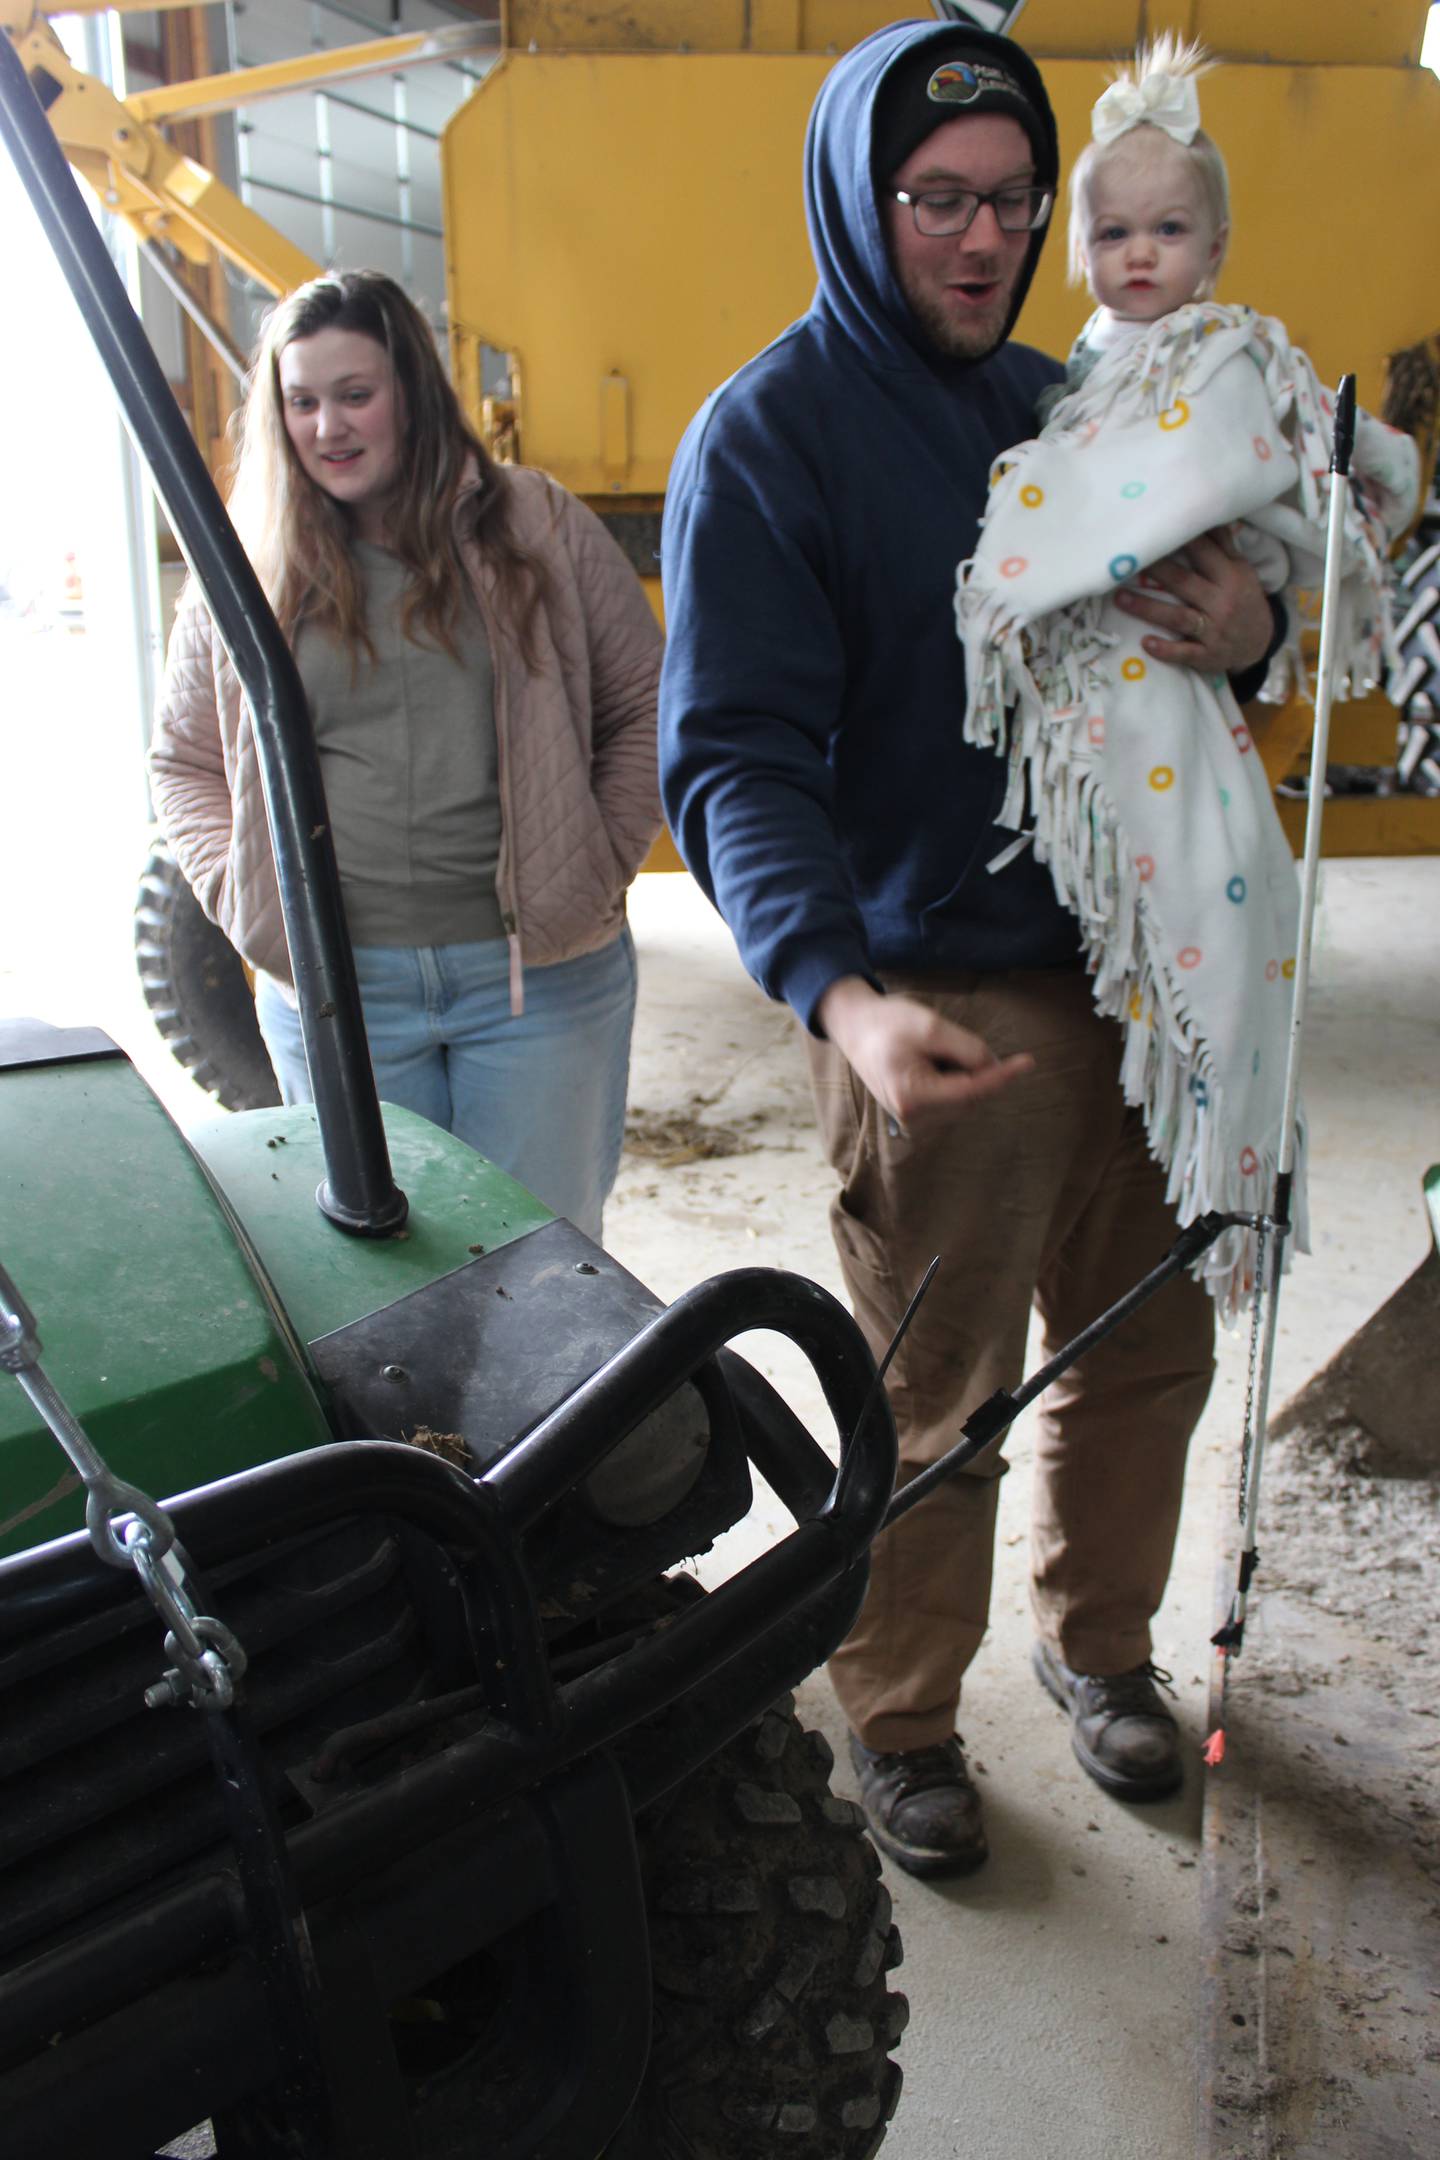 Mitchel Rahn, holding his daughter, Emmerson, explains how he uses the Gator with a GPS receiver to map the boundaries of the fields, while his wife, Samantha looks on.